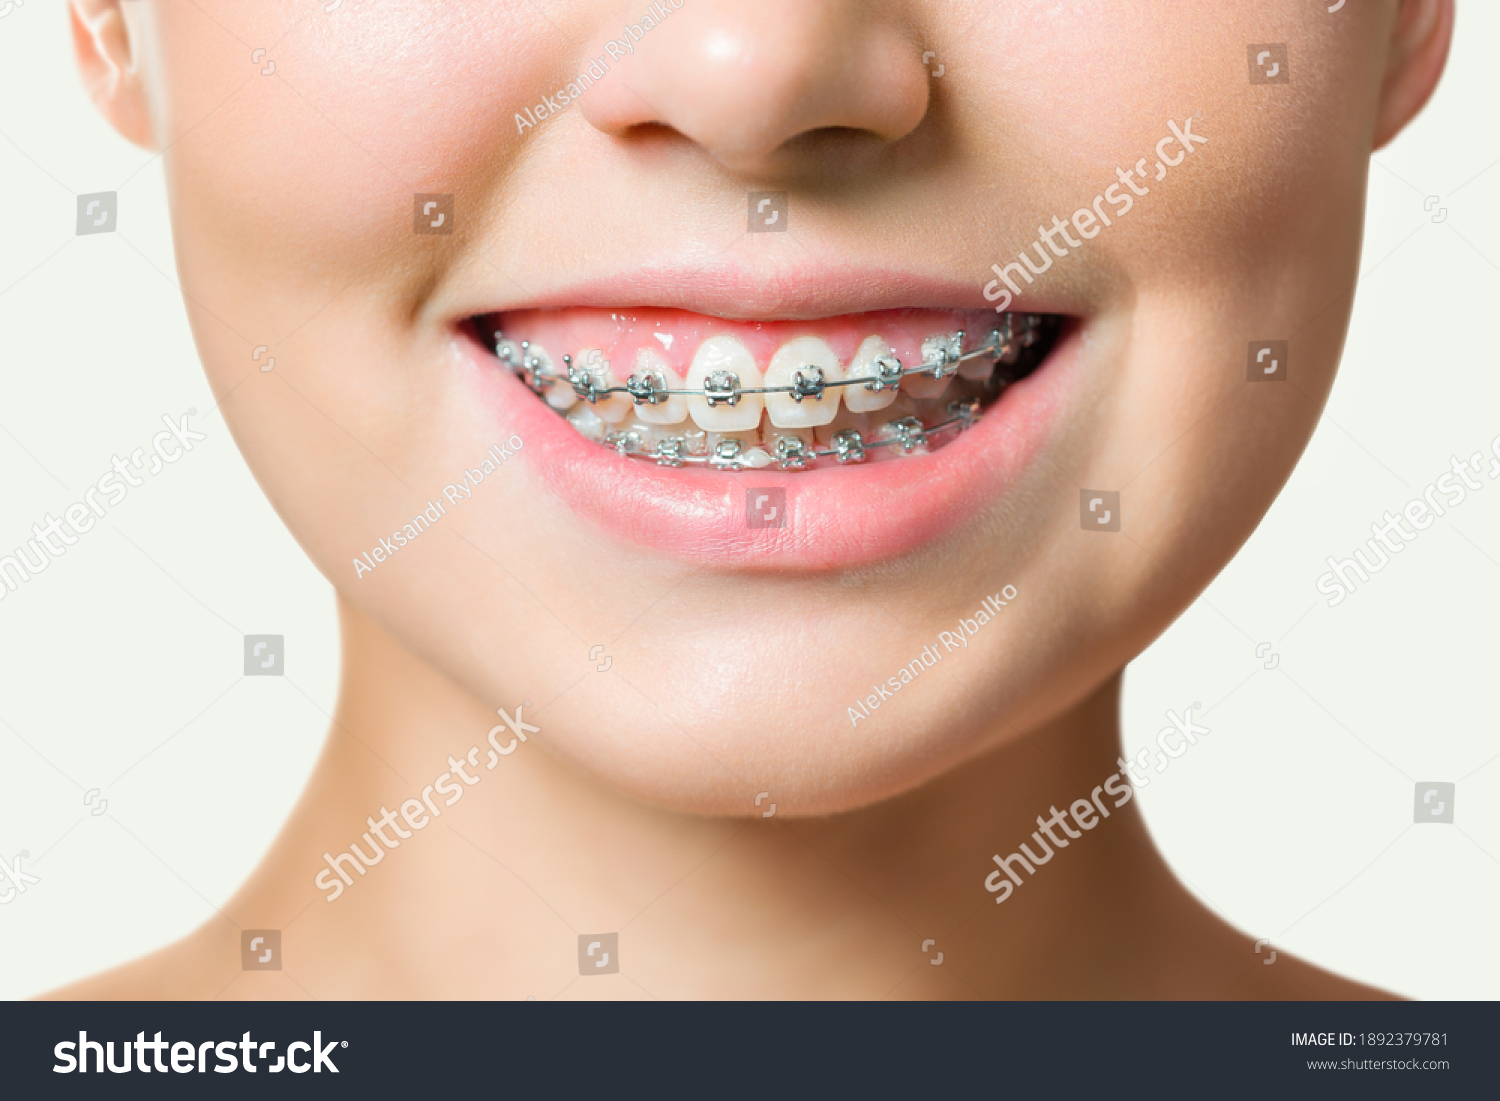 Orthodontic Treatment. Dental Care Concept. Beautiful Woman Healthy Smile close up. Closeup Ceramic and Metal Brackets on Teeth. Beautiful Female Smile with Braces #1892379781